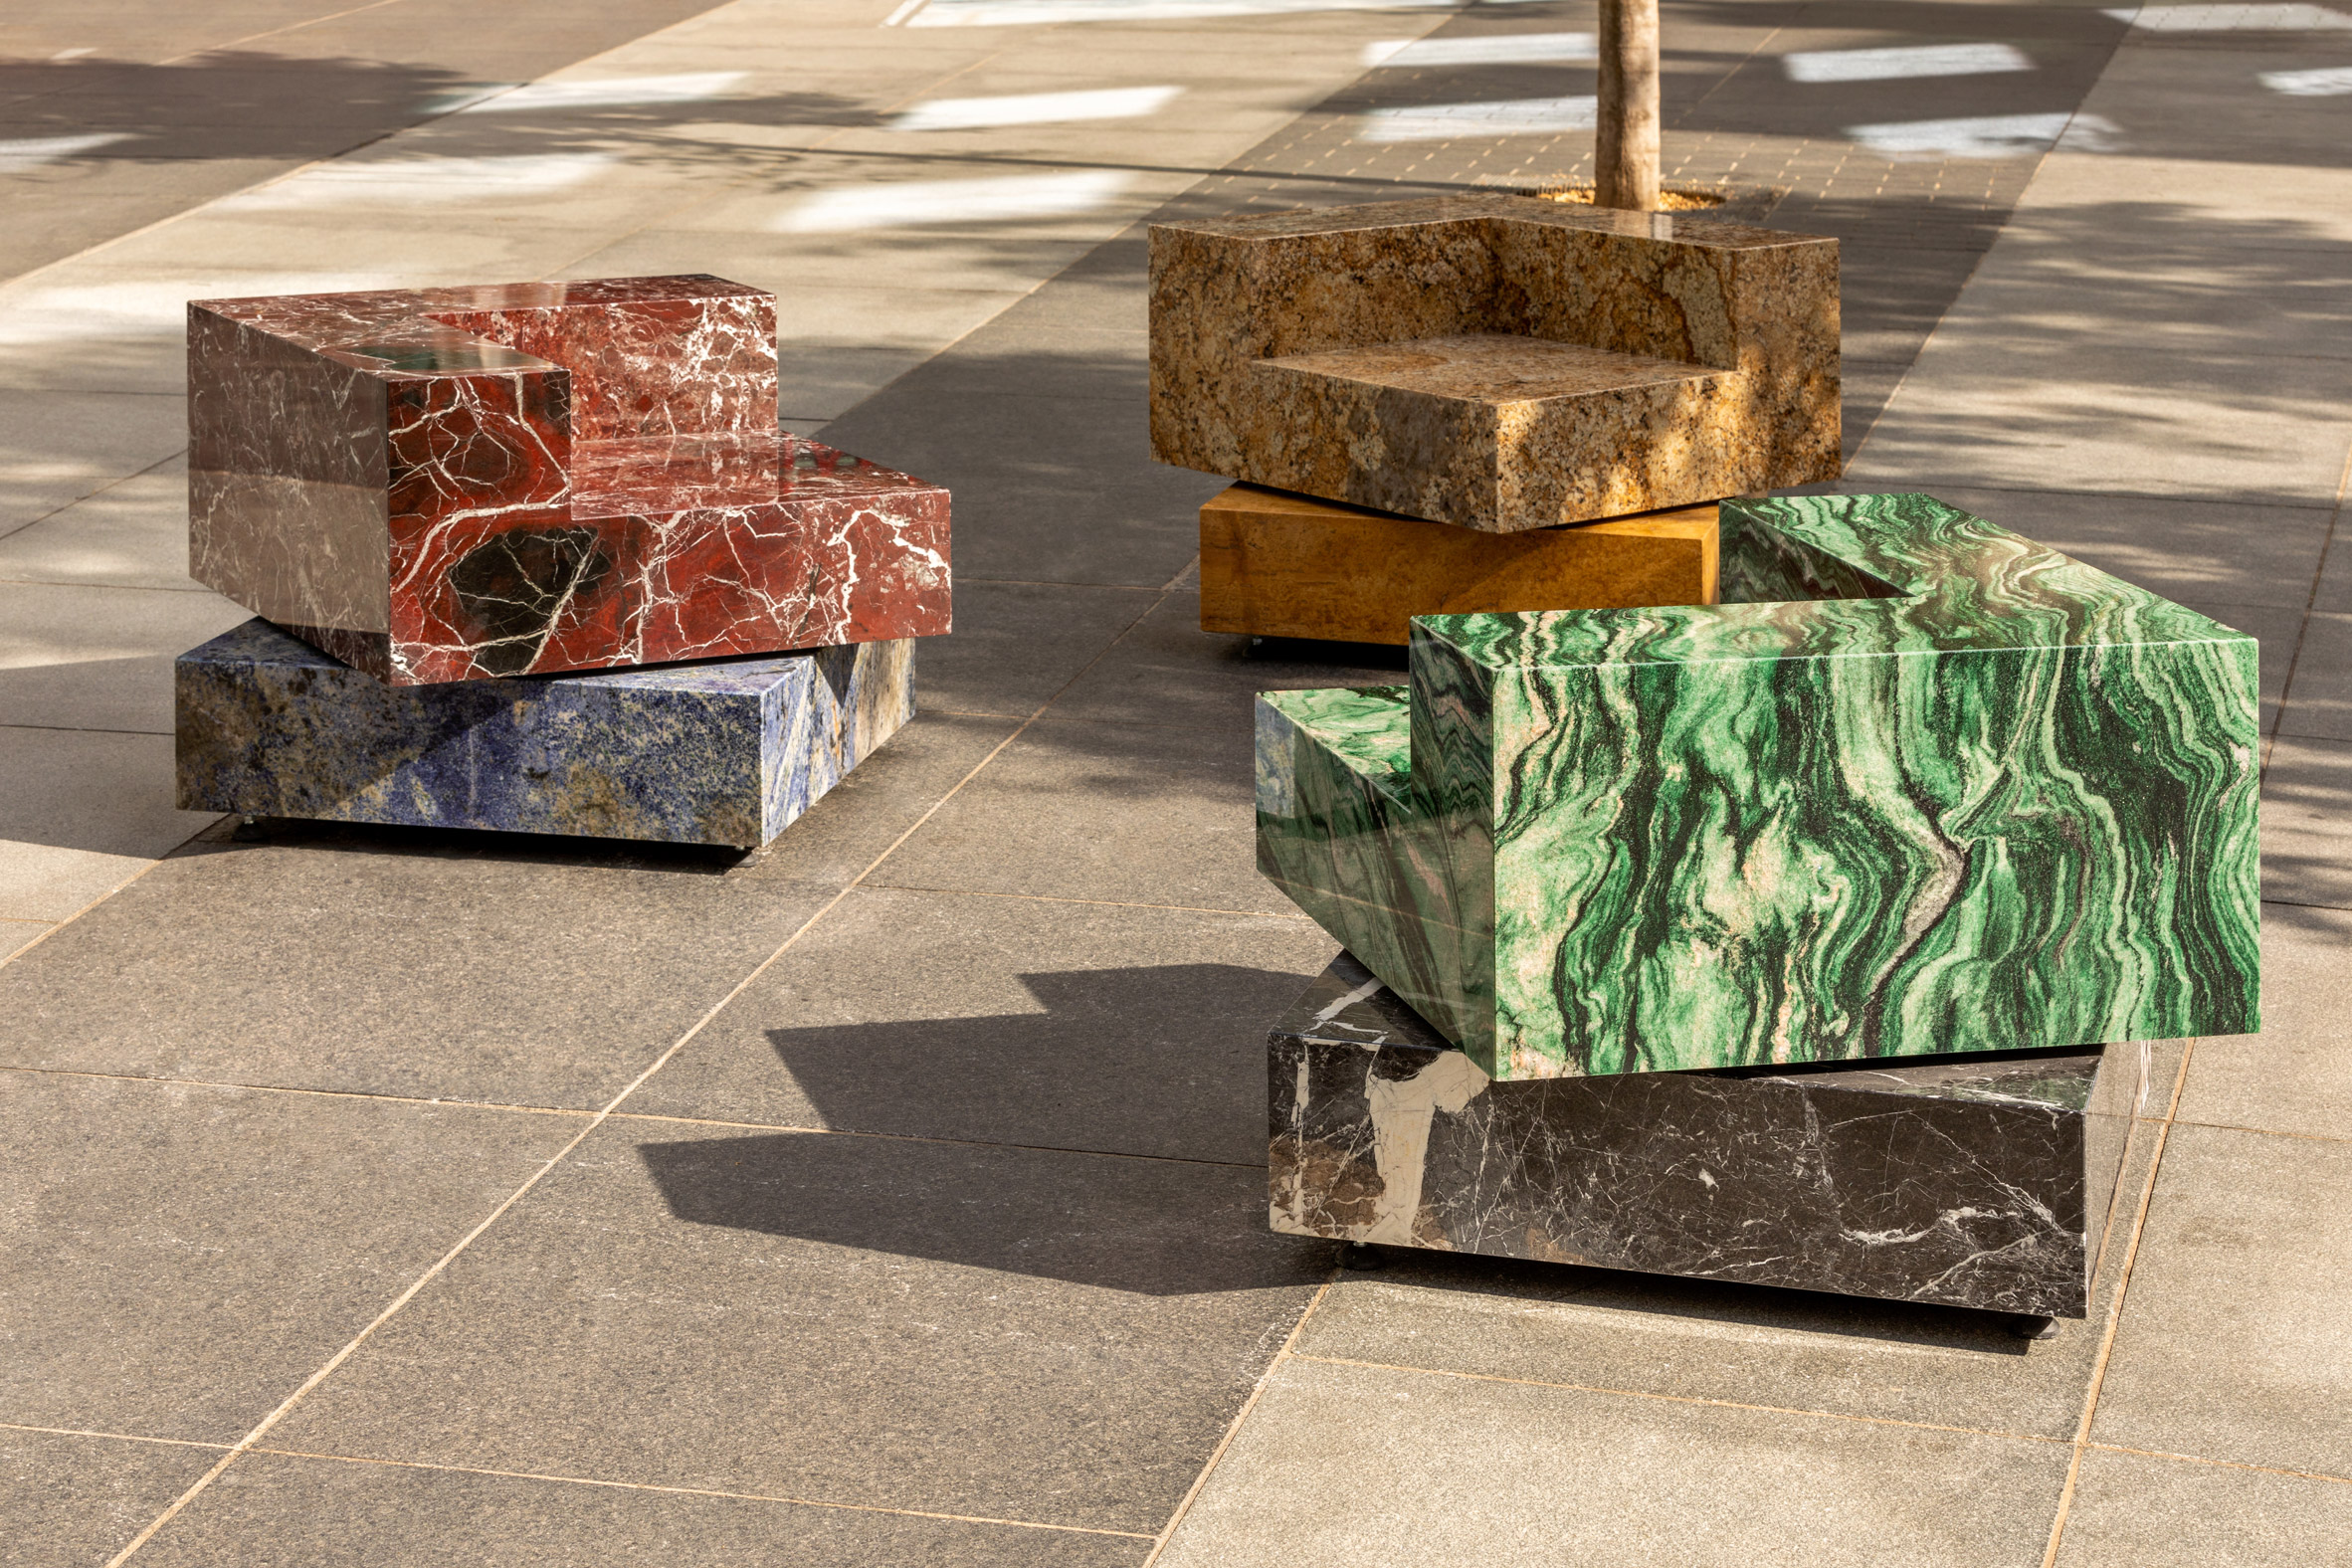 Image of chairs made from natural stones